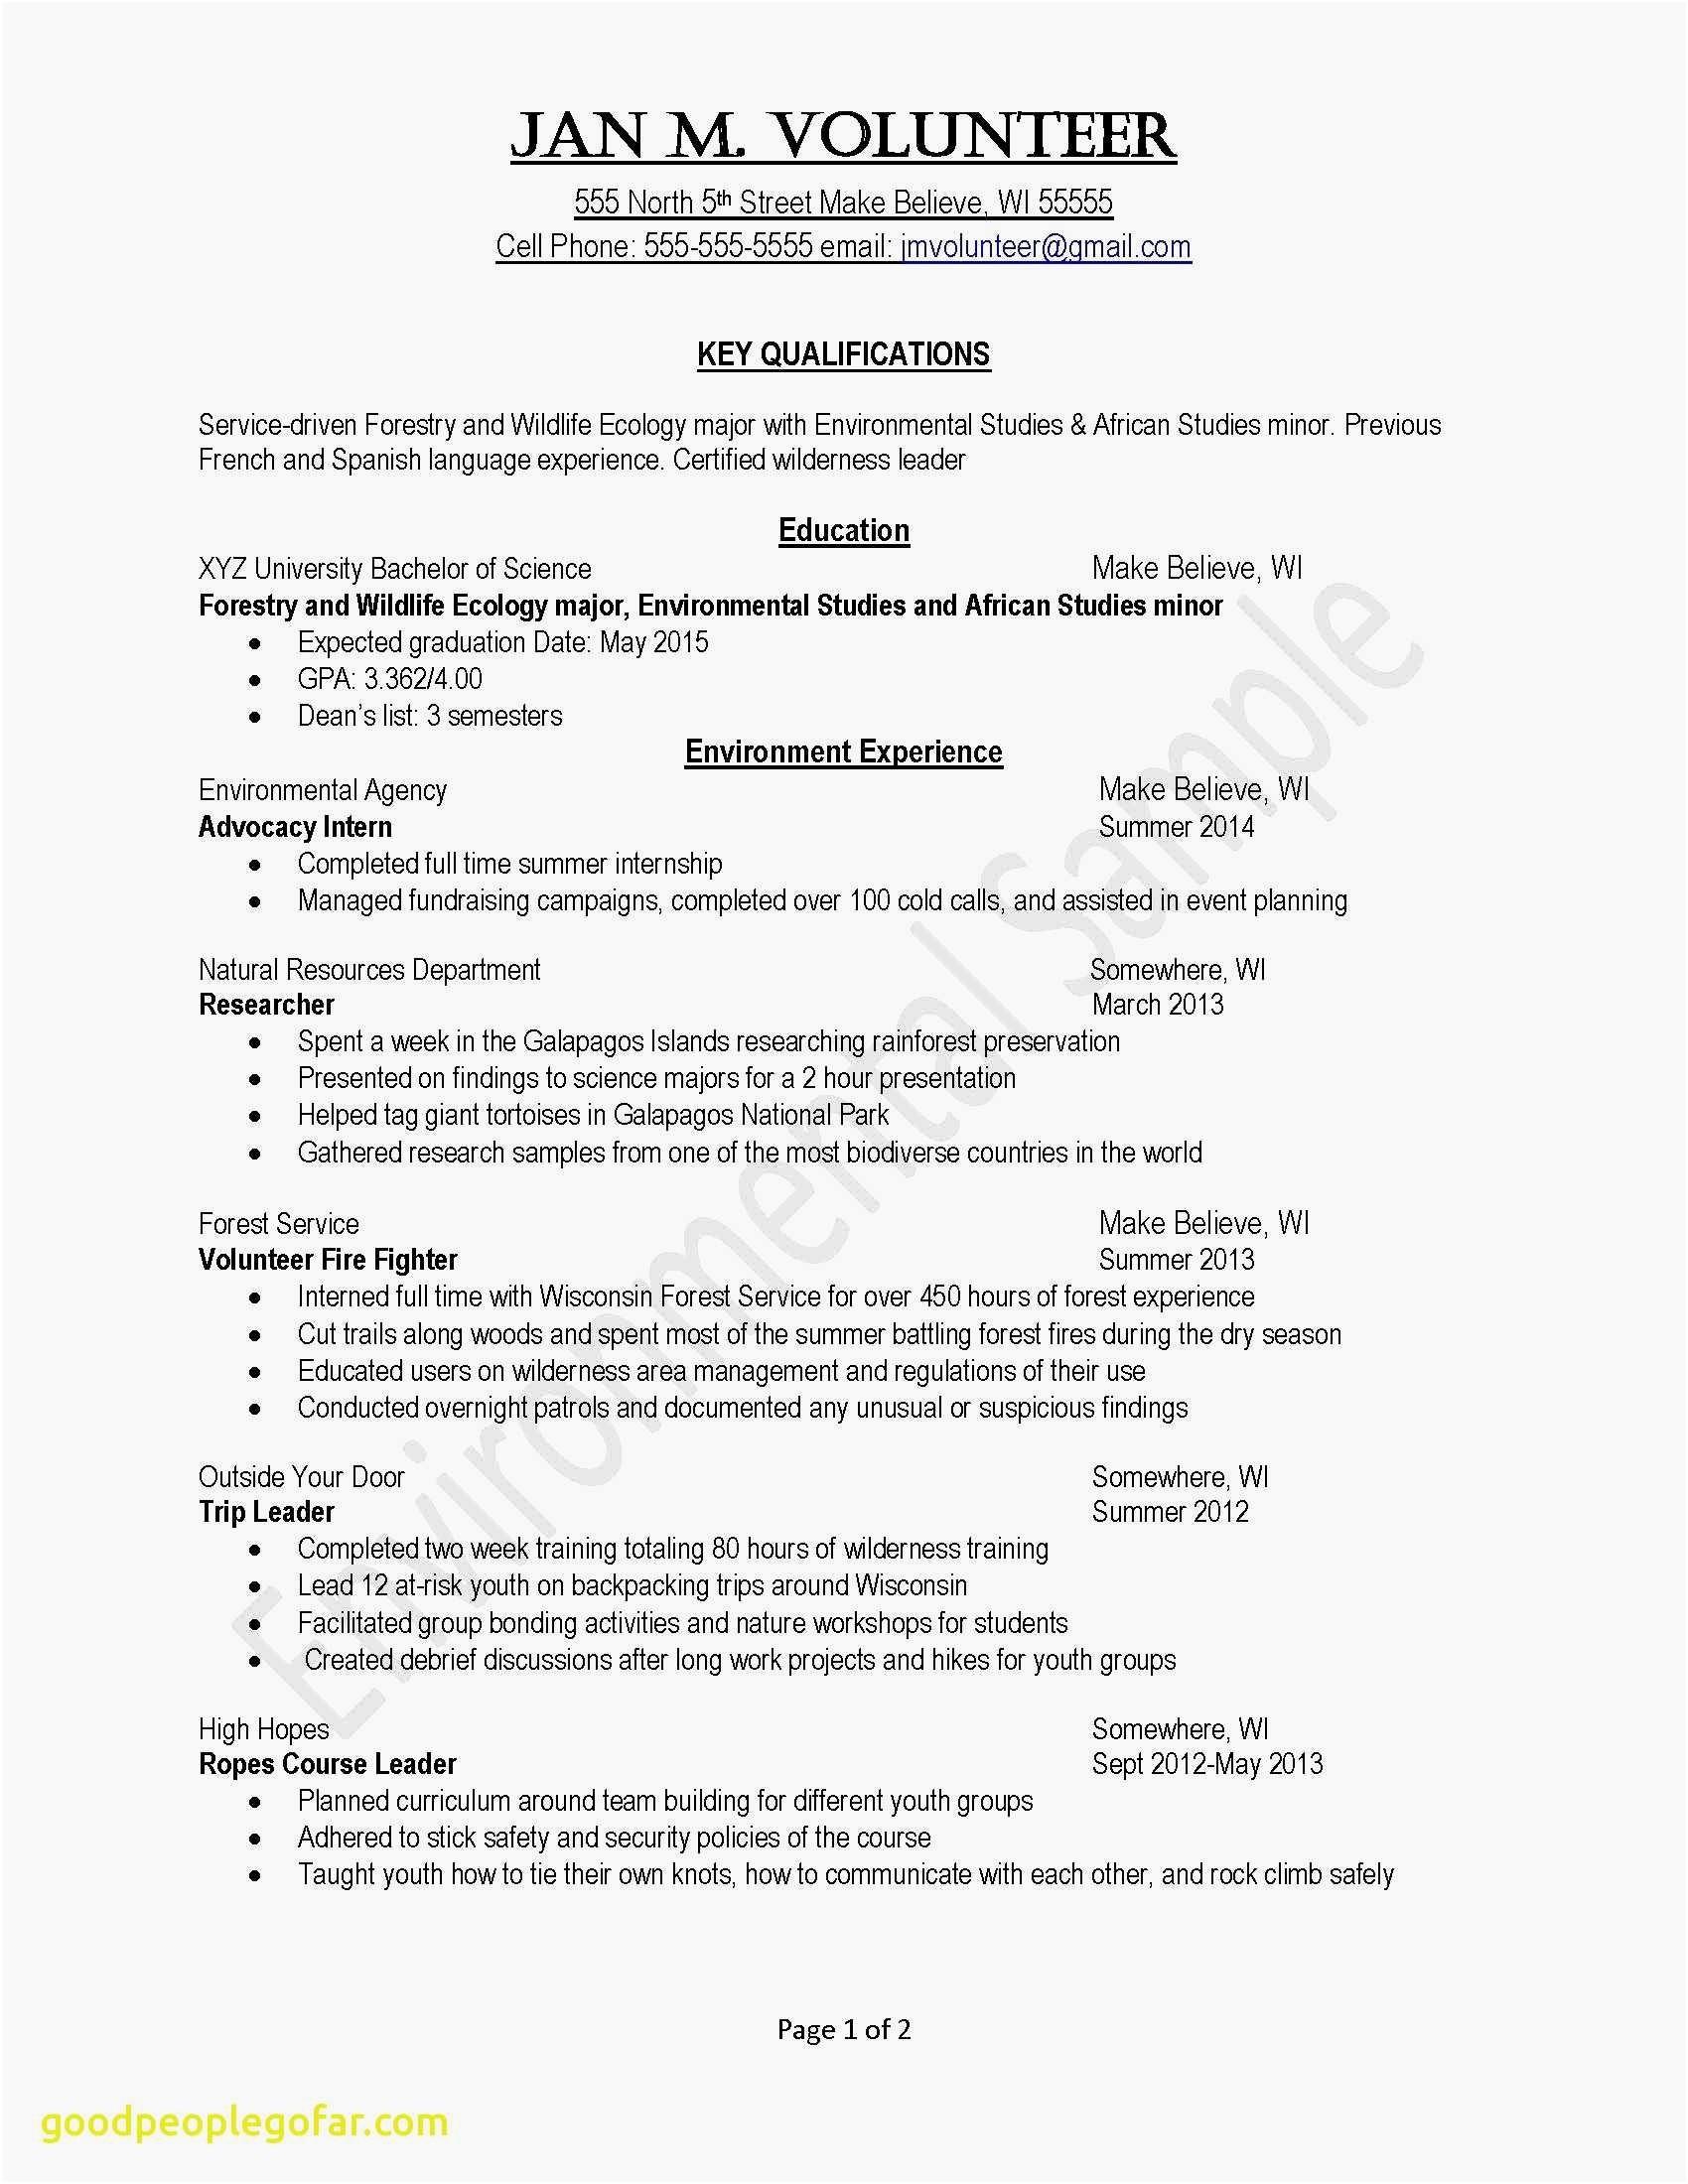 Email Letter Of Recommendation Template - Examples Resume formats Elegant Free Resume Analysis Valid Best